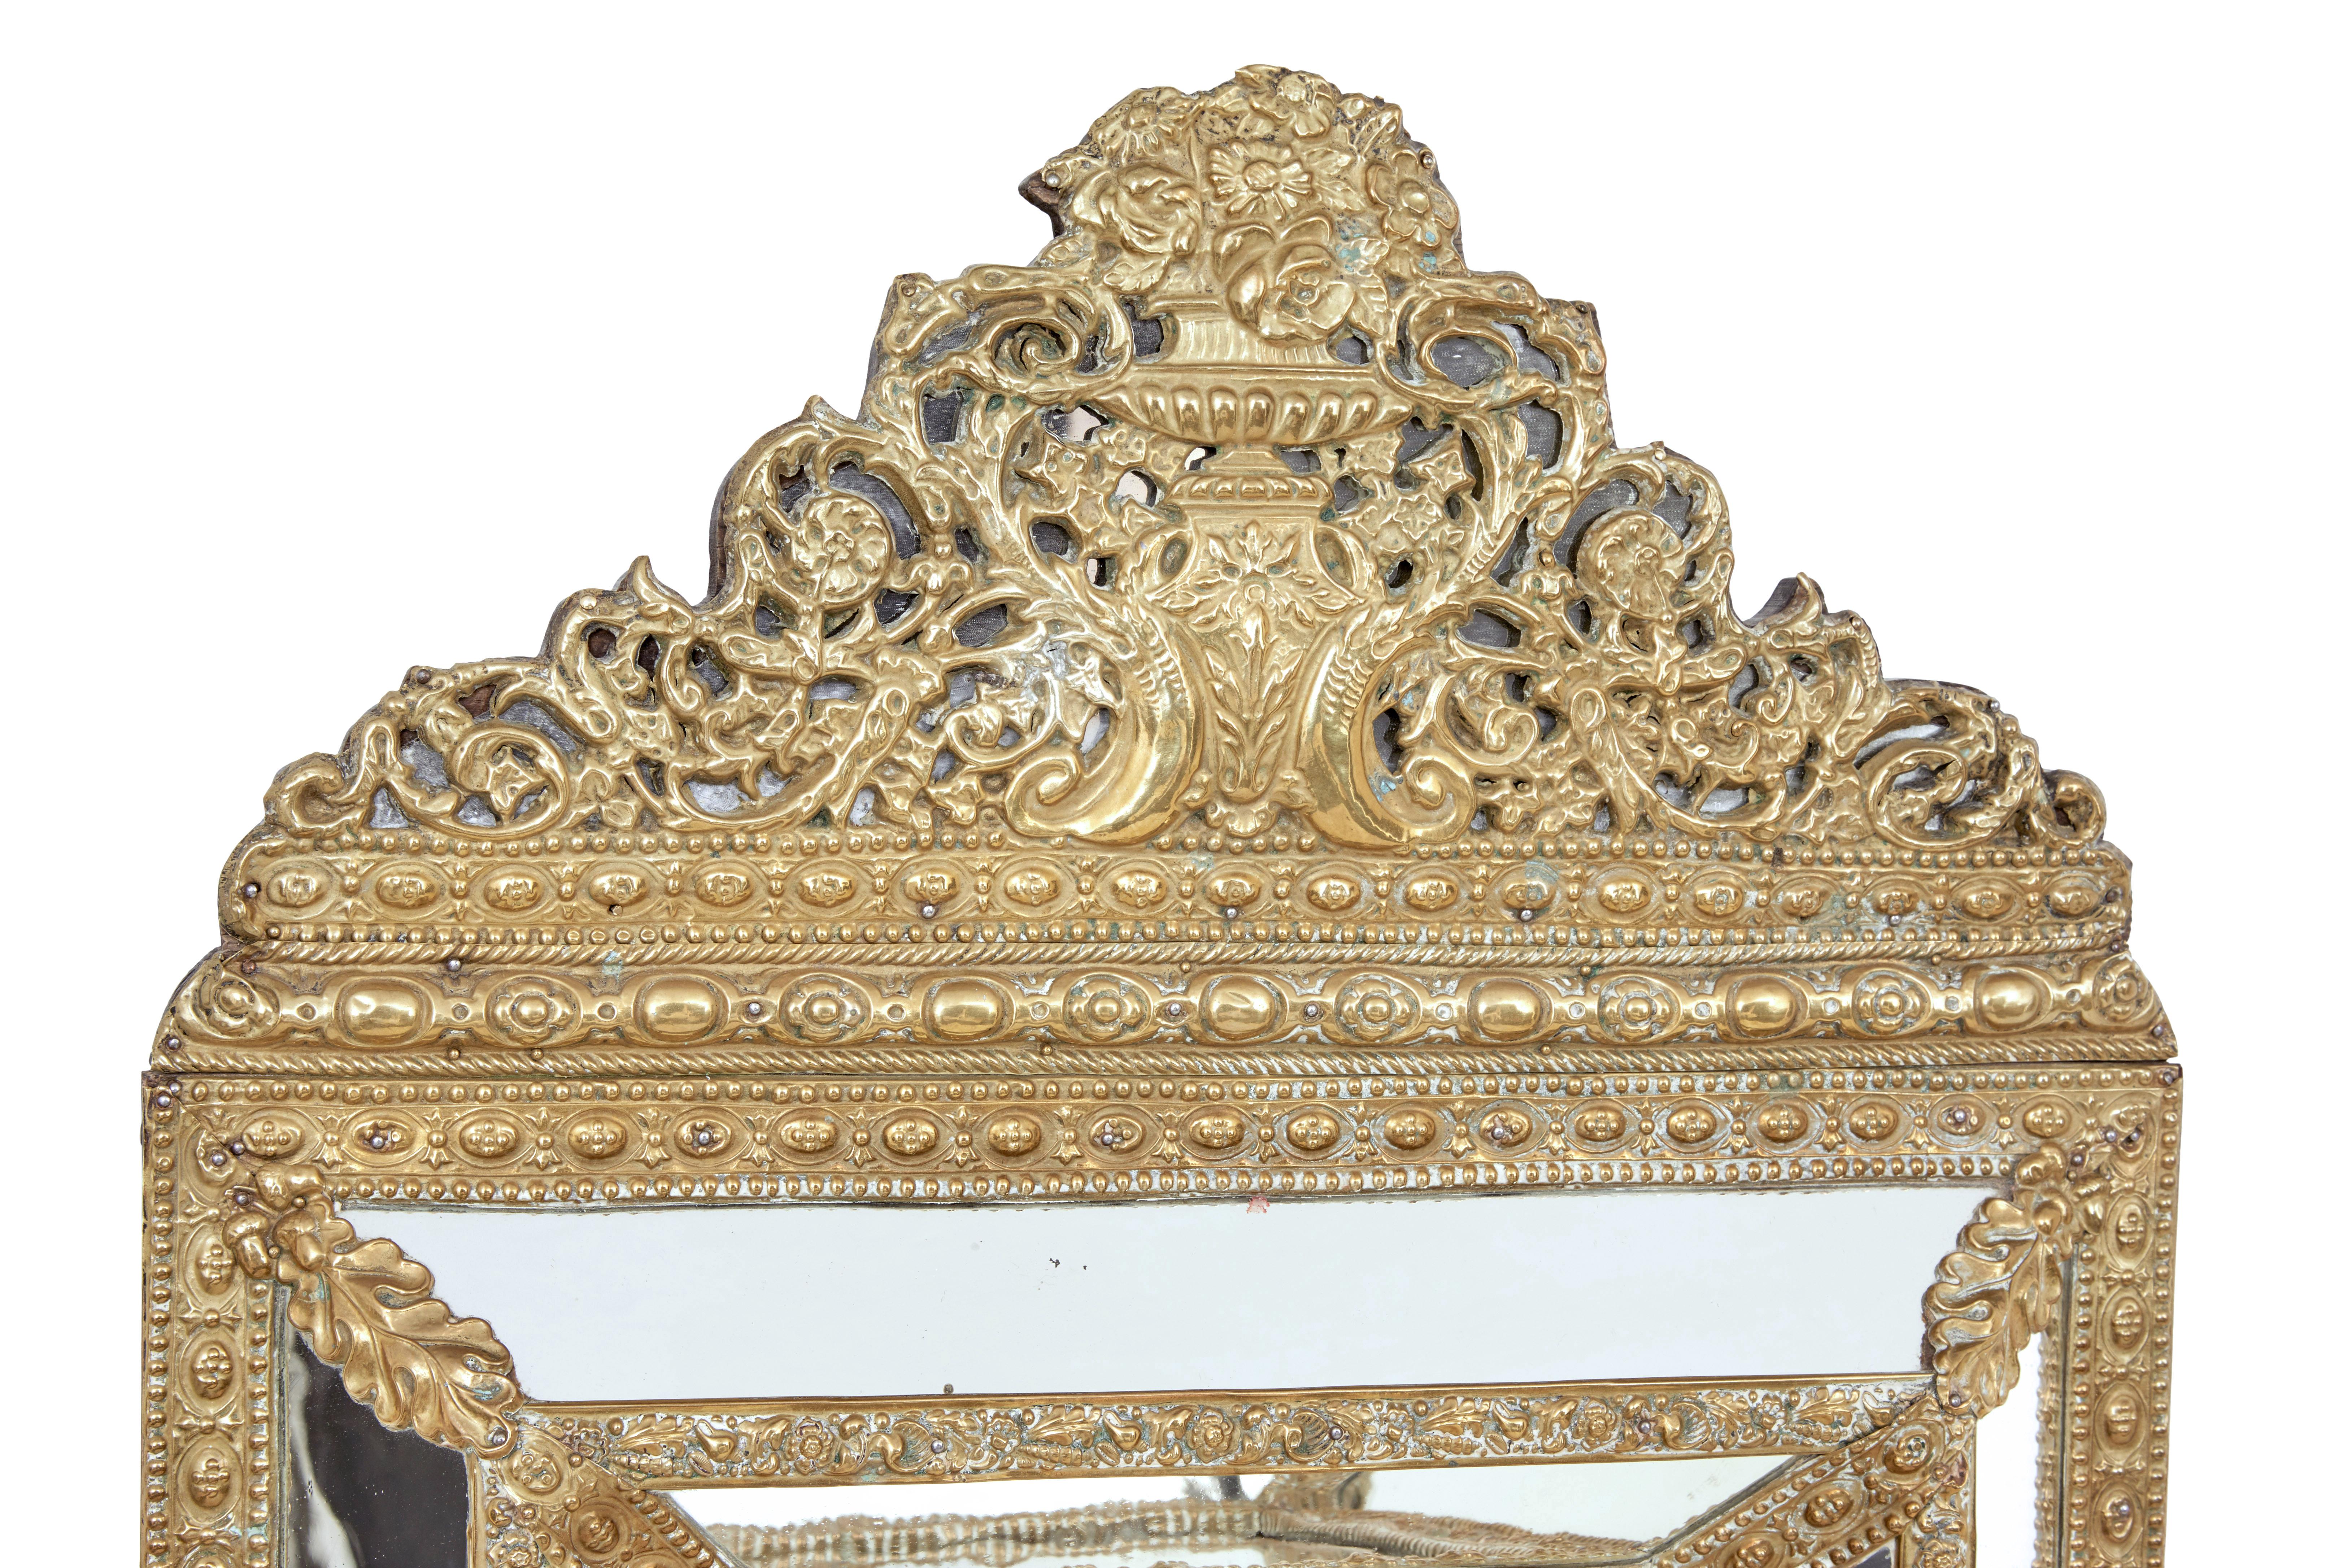 Late 19th century ornate brass cushion mirror, circa 1890.

Ornate pressed brass cushion mirror. Portrait orientation with decoration cornice of an urn and coat of arms.

Minor surface marks to metalwork, minor wear to mirror plate.